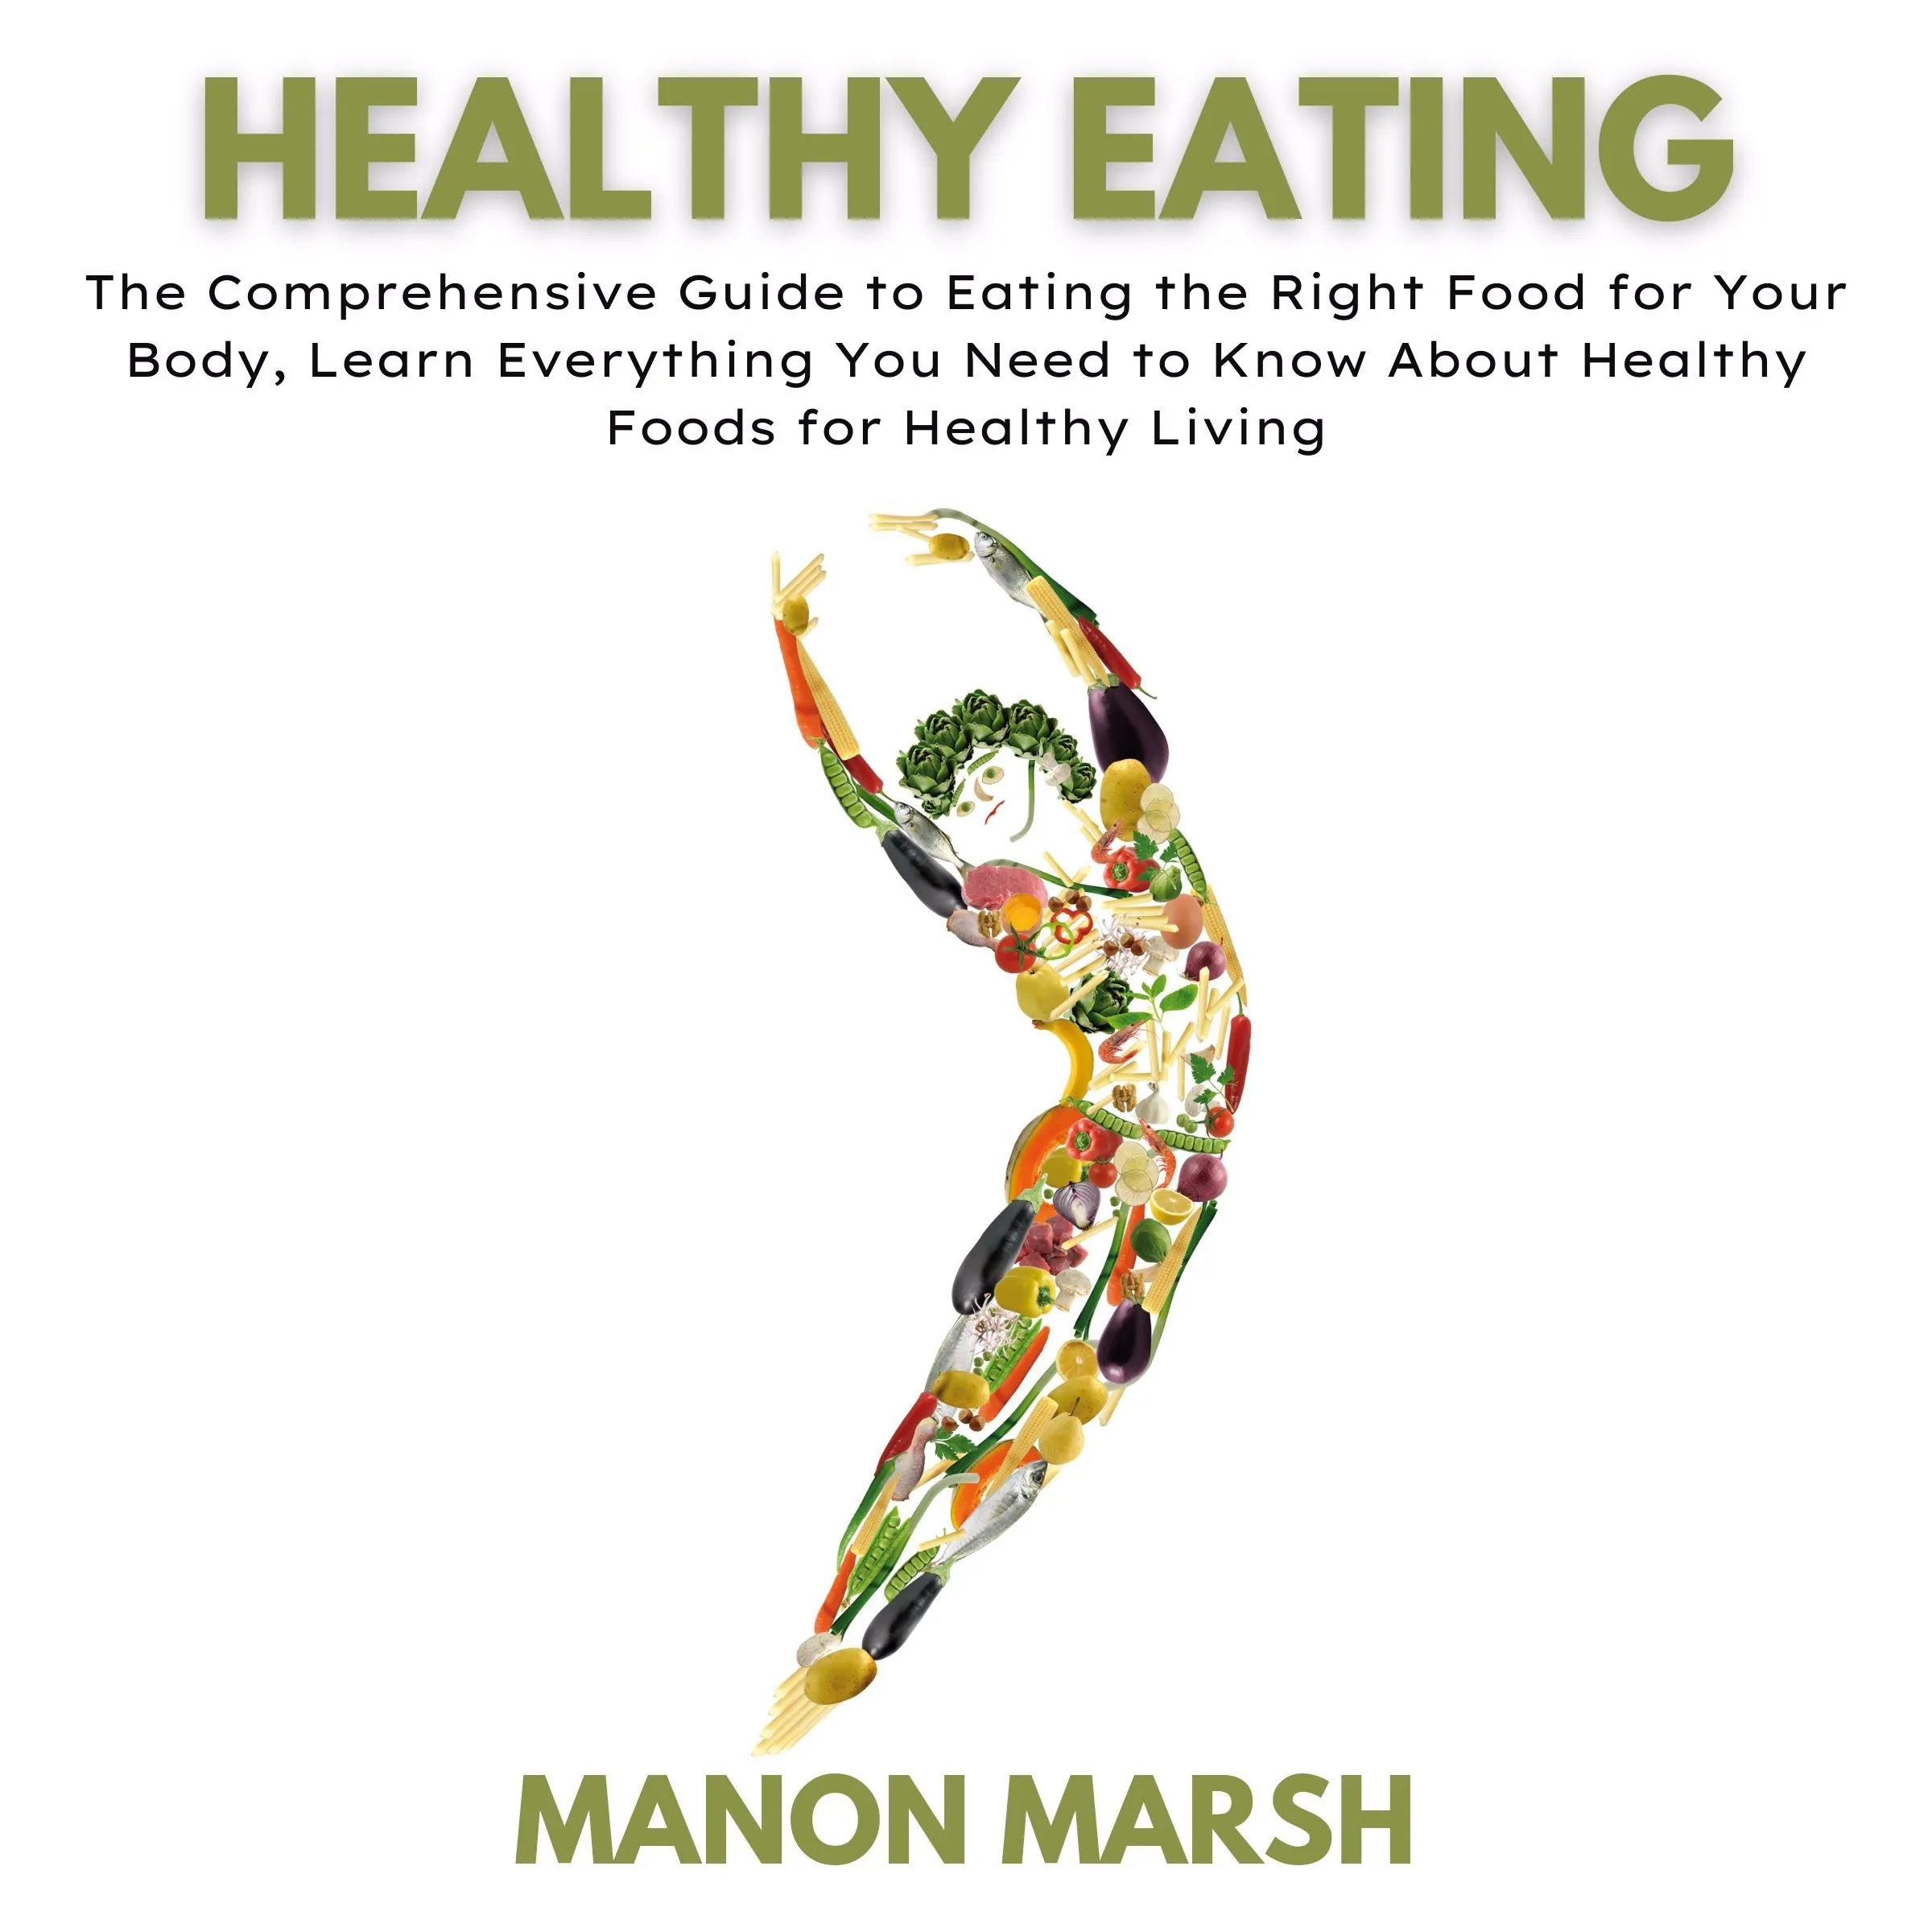 Healthy Eating Audiobook by Manon Marsh